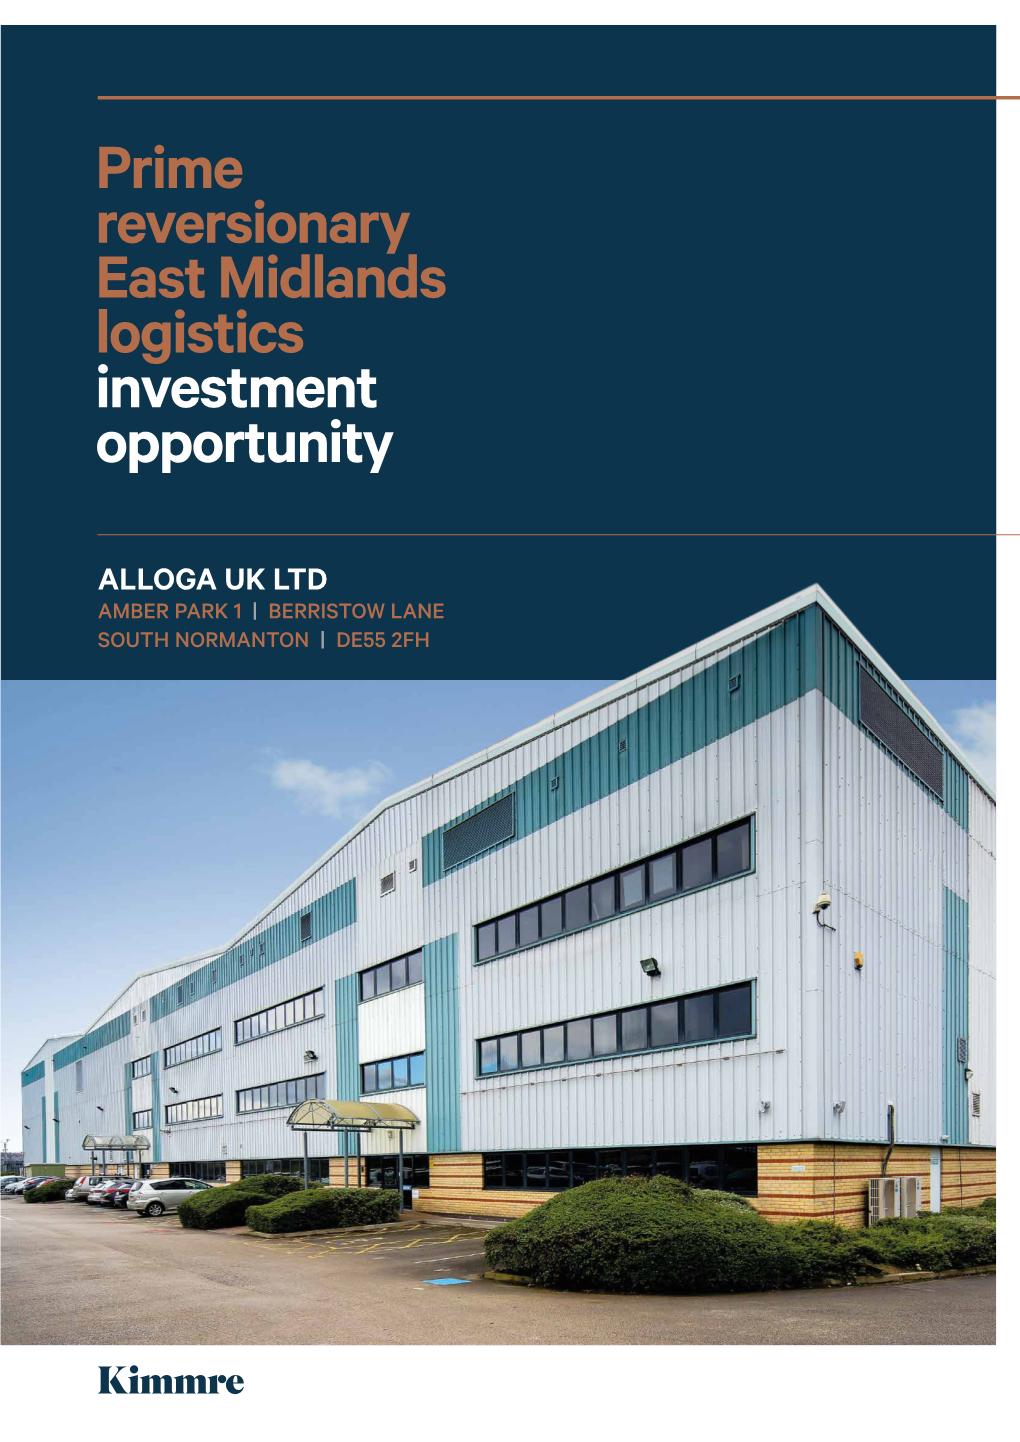 Prime Reversionary East Midlands Logistics Investment Opportunity